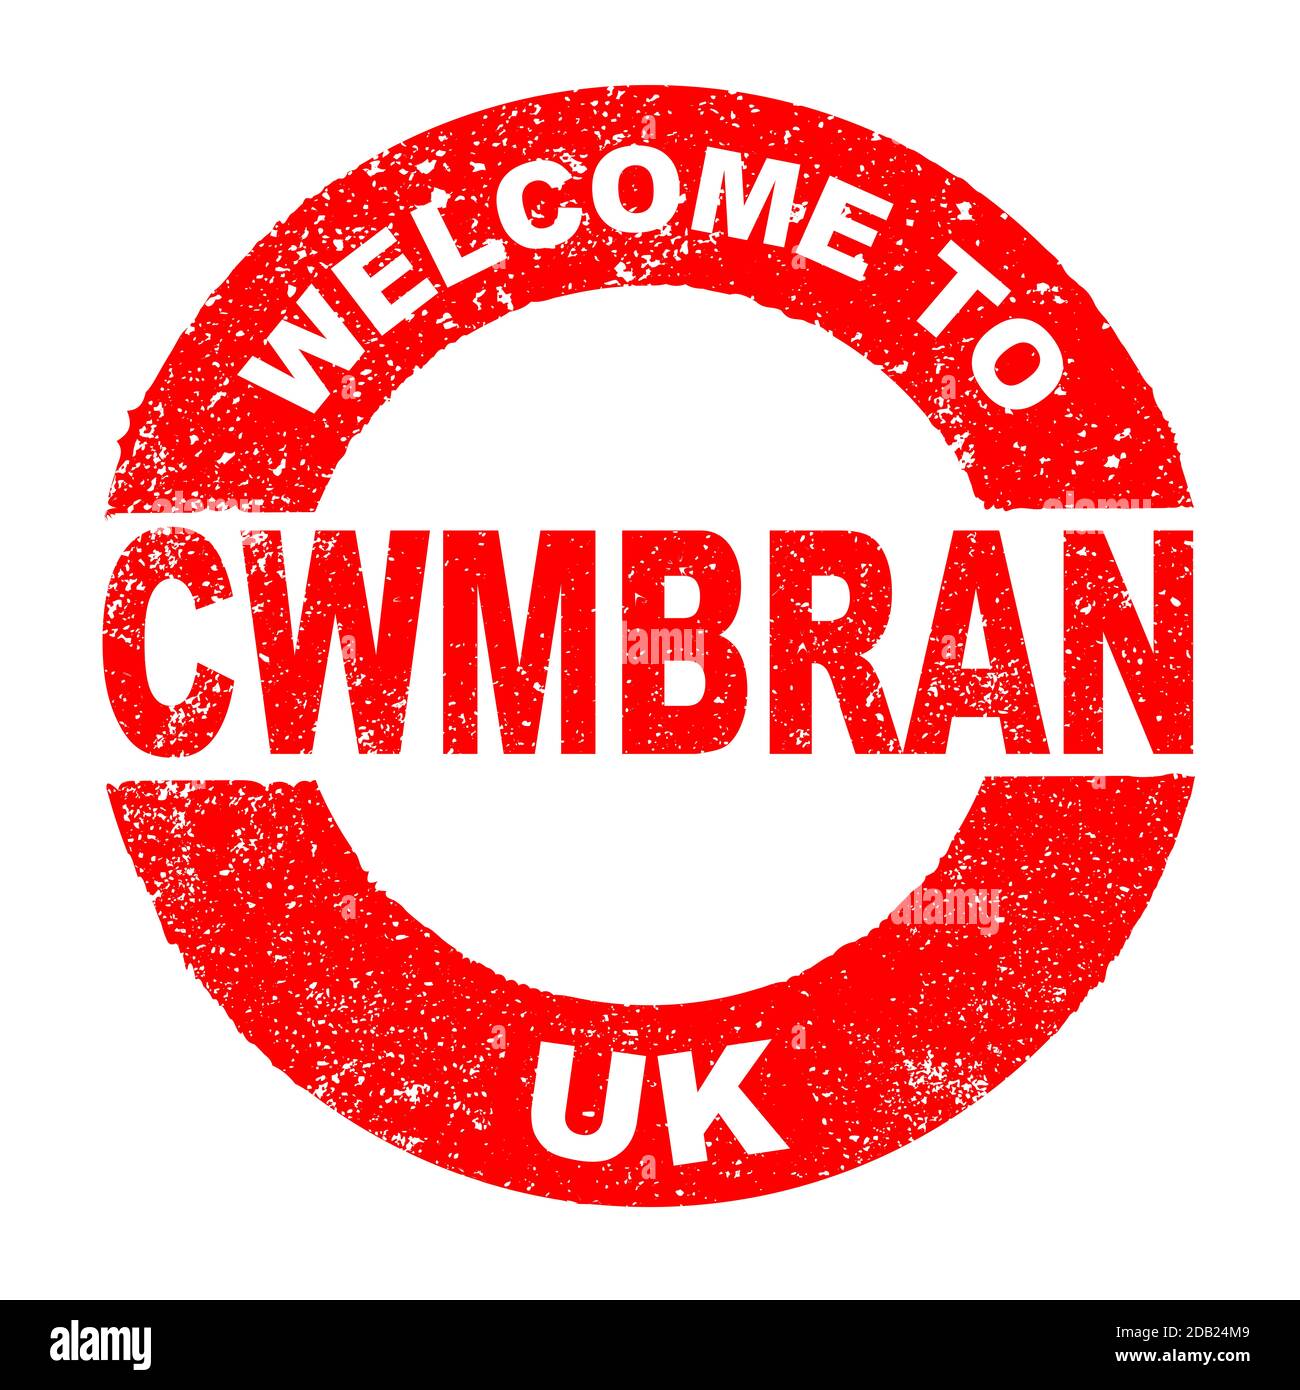 A grunge rubber ink stamp with the text Welcome To Cwmbran UK over a white background Stock Photo